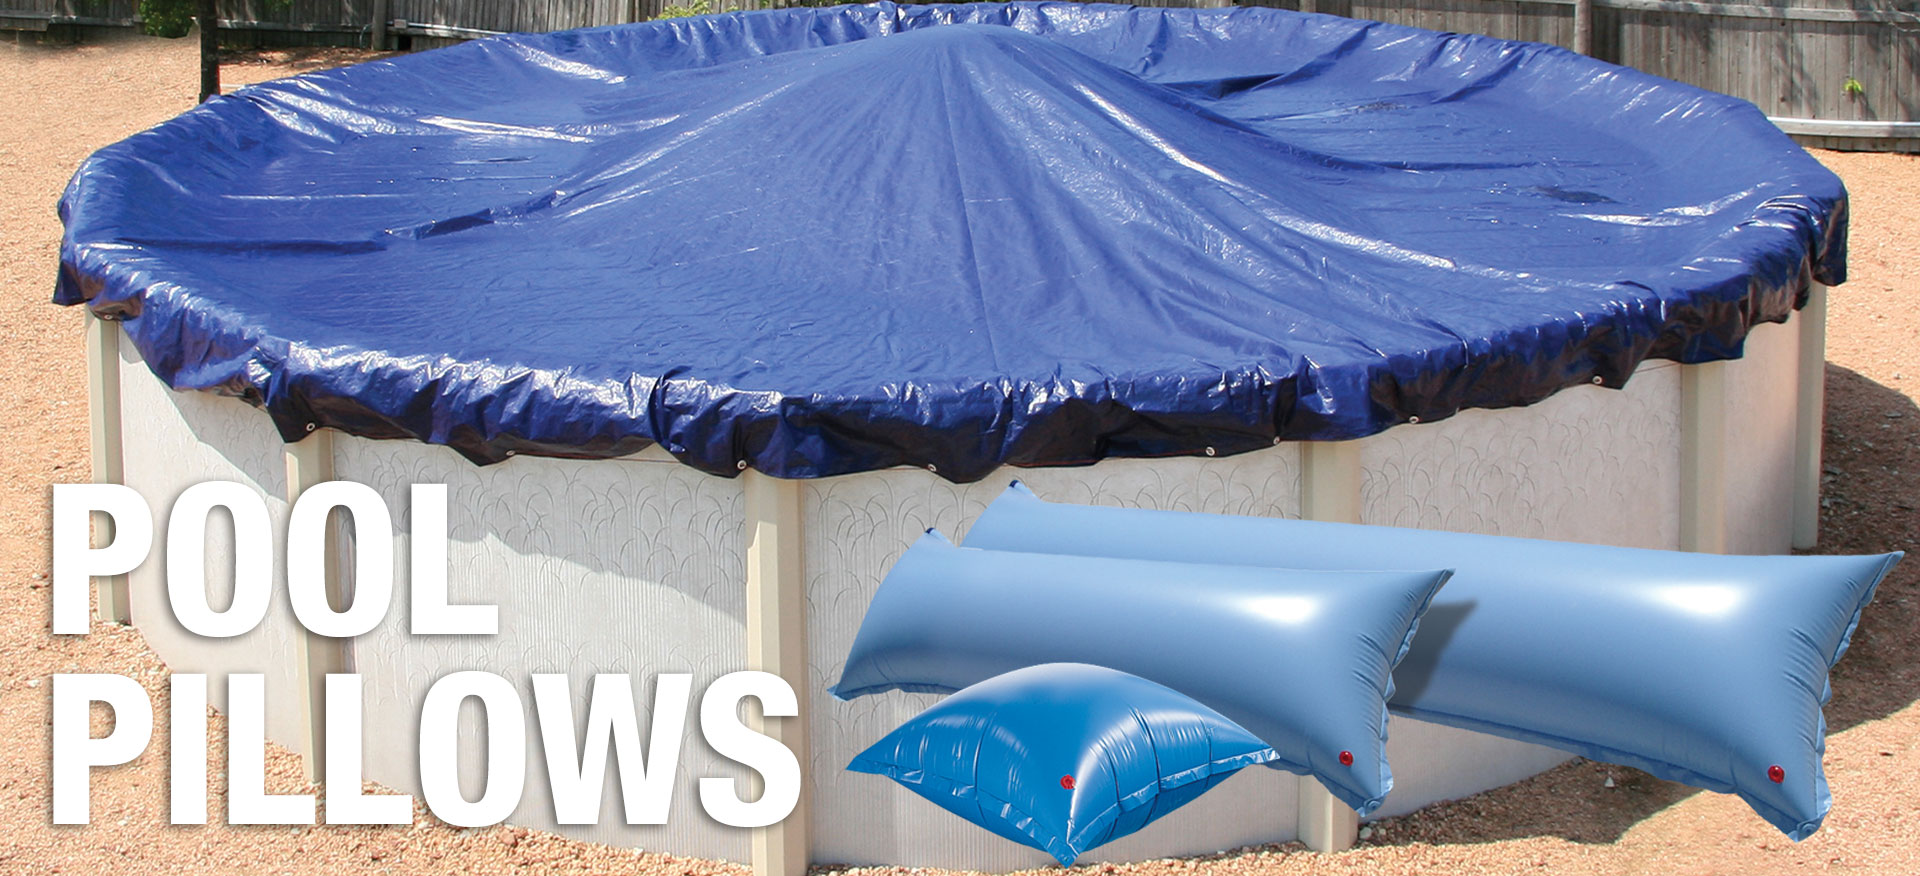 pool pillows and winter pool covers